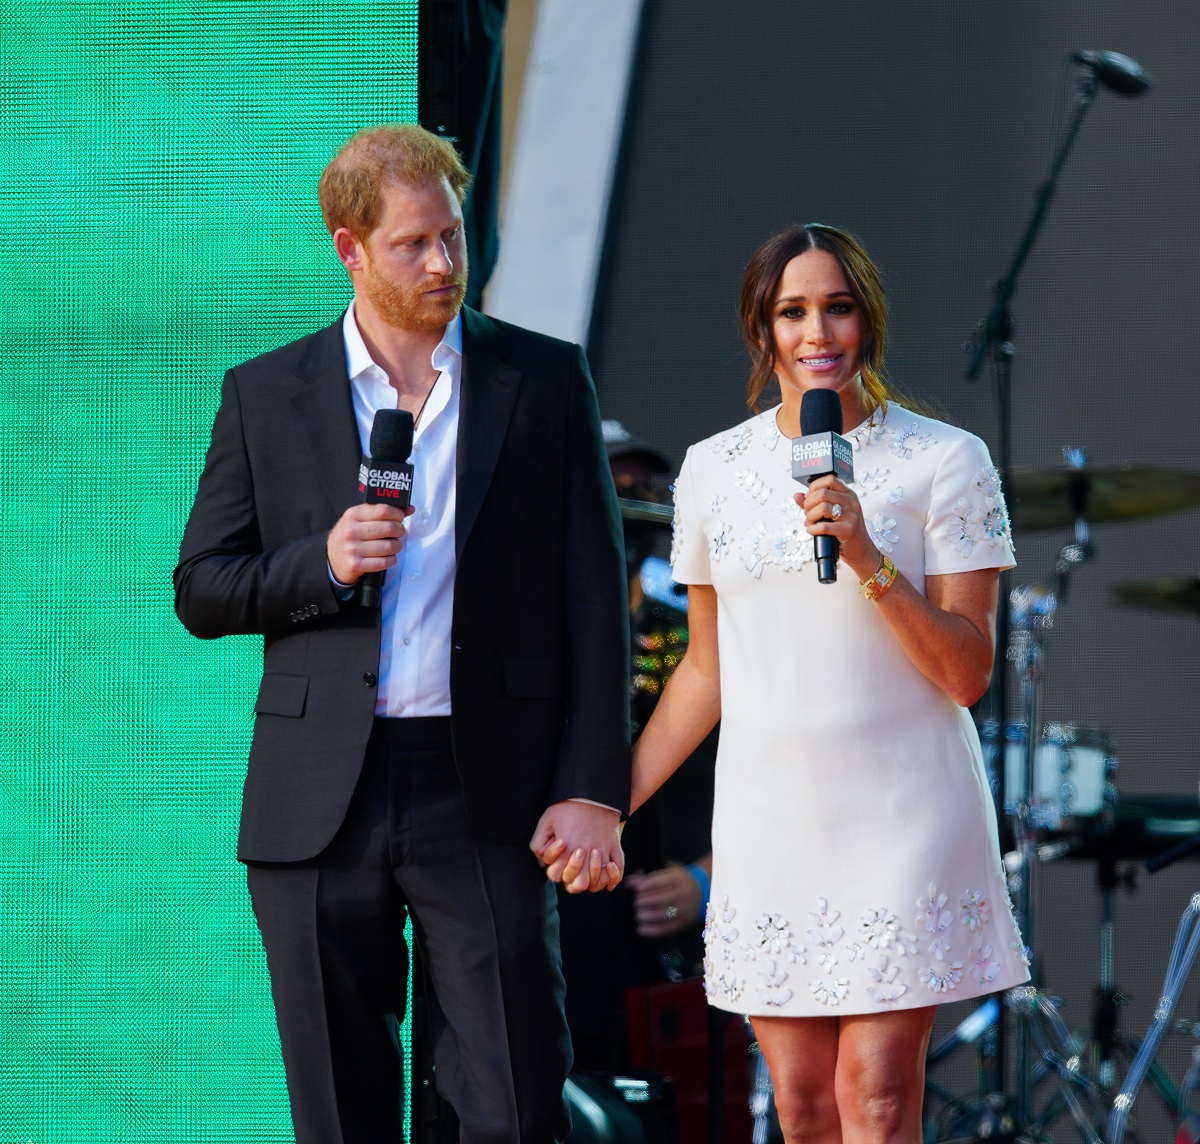 Prince Harry and Meghan Markle speak on stage at the Global Citizen Live New York event